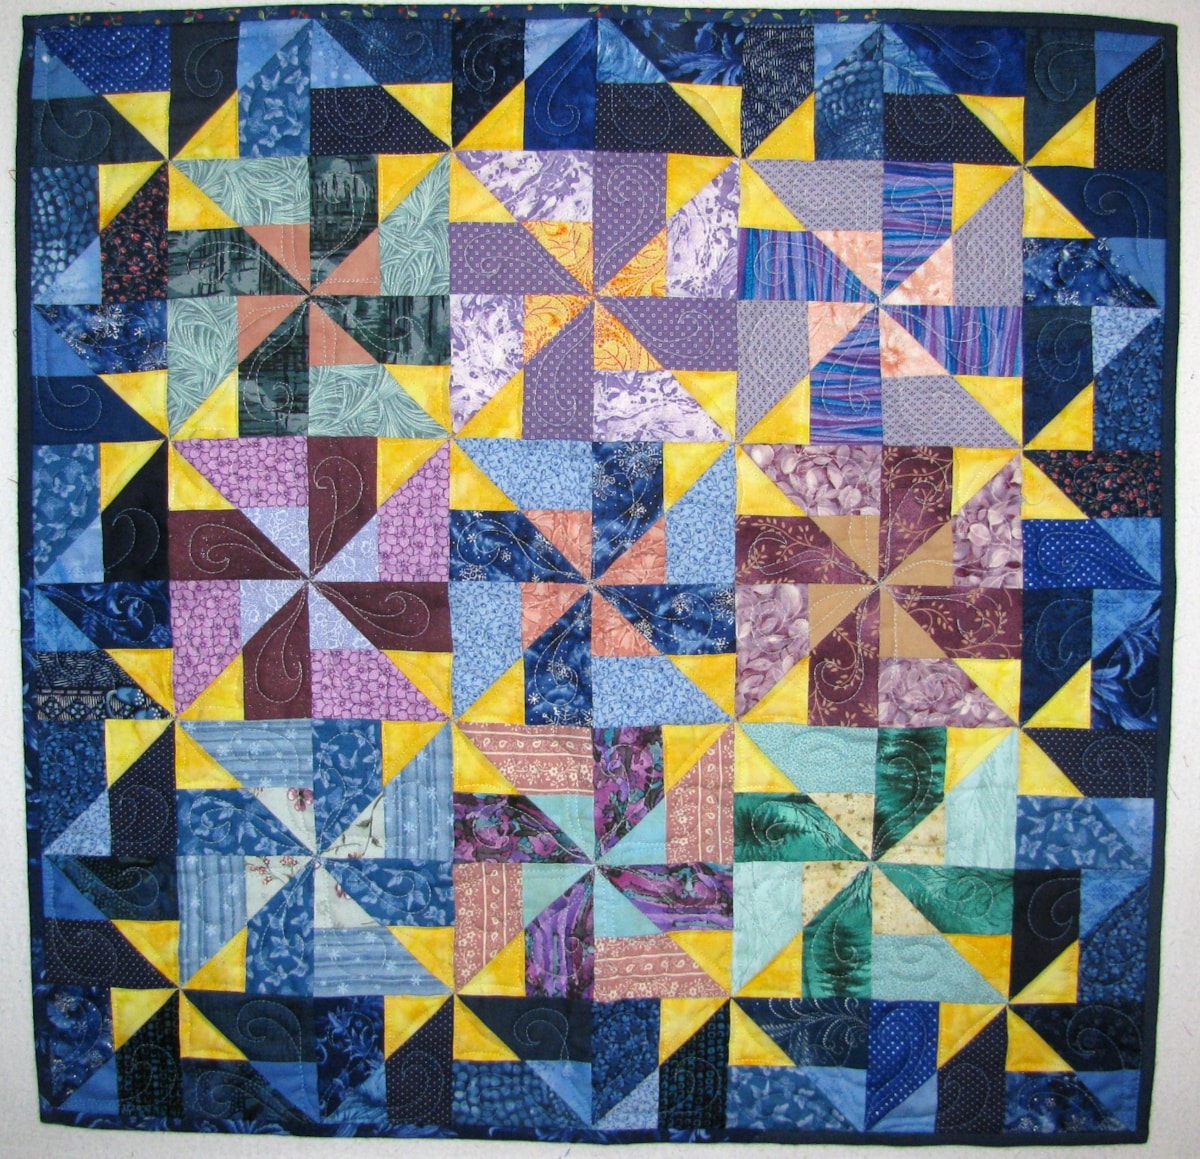 By Louisa Robertson. http://louquilts.blogspot.ca/2015/05/spring-cleaning-challenge.html Here is my Peekaboo Pinwheels quilt, my version of the Scrappier quilt layout. I had great fun playing with fabrics in Electric Quilt and discovered there were lots of pinwheels hiding in the design.